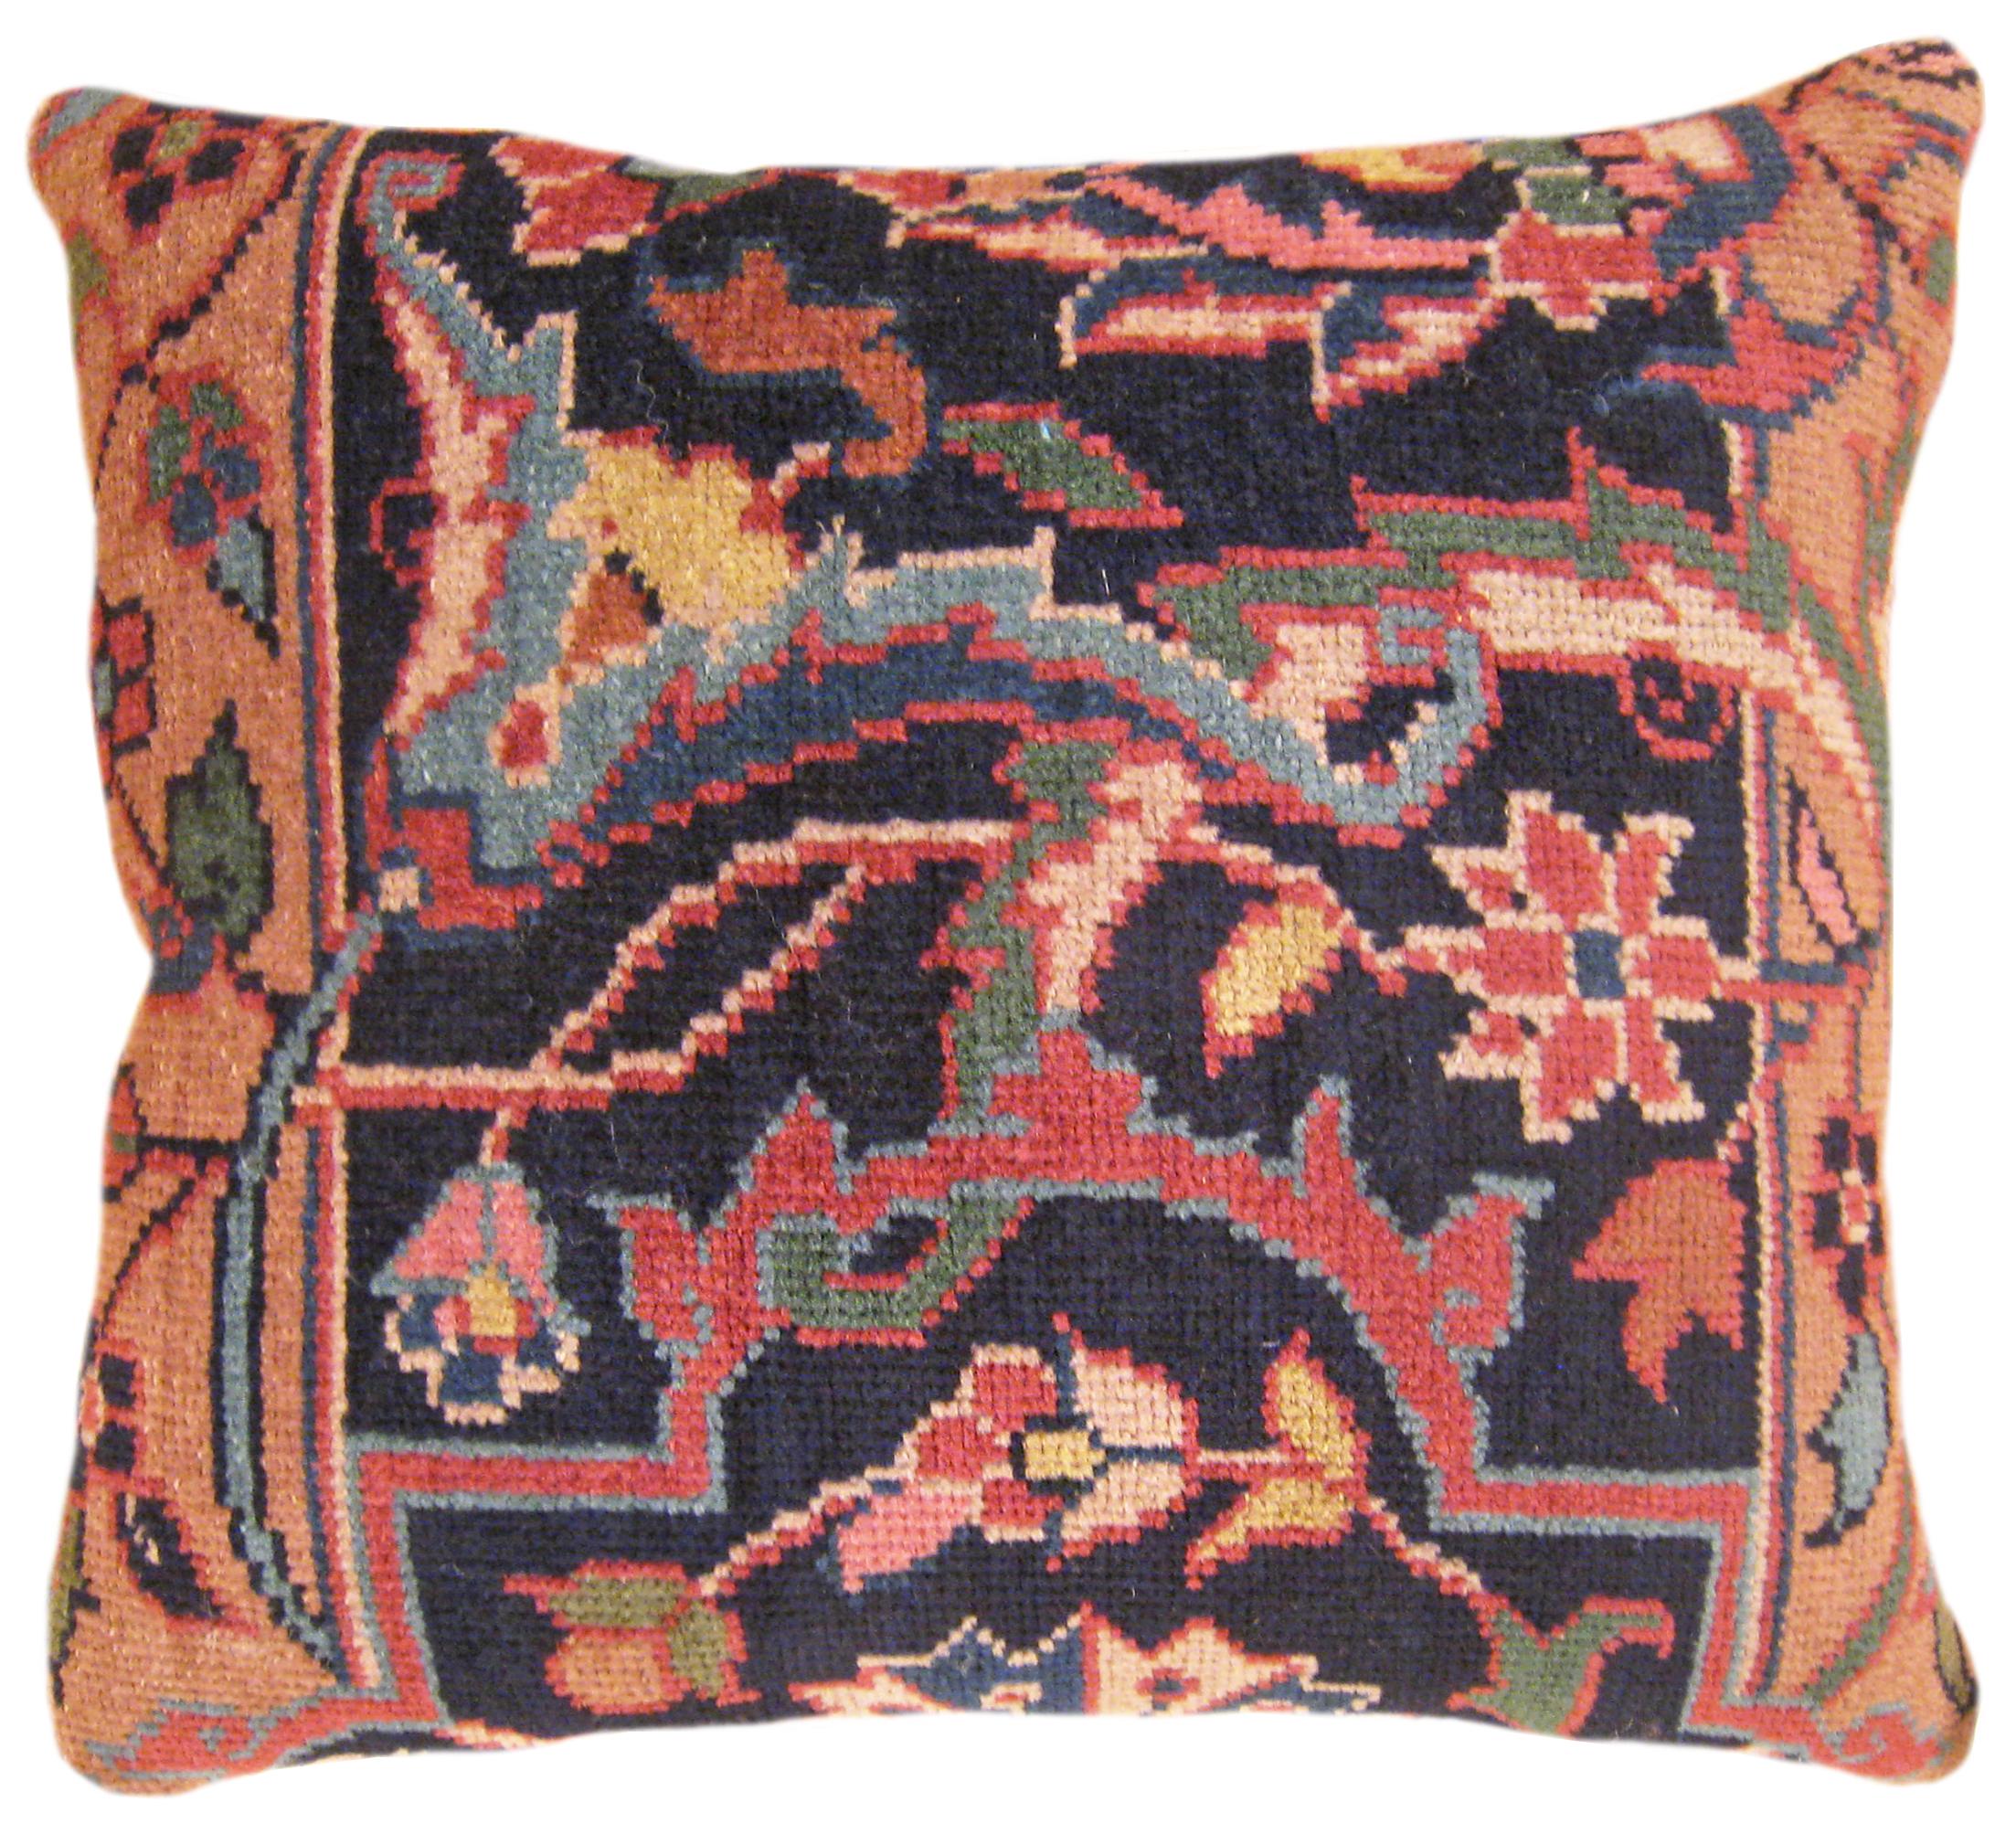 Set of Decorative Antique Indian Agra Rug Pillows with Floral Elements In Good Condition For Sale In New York, NY